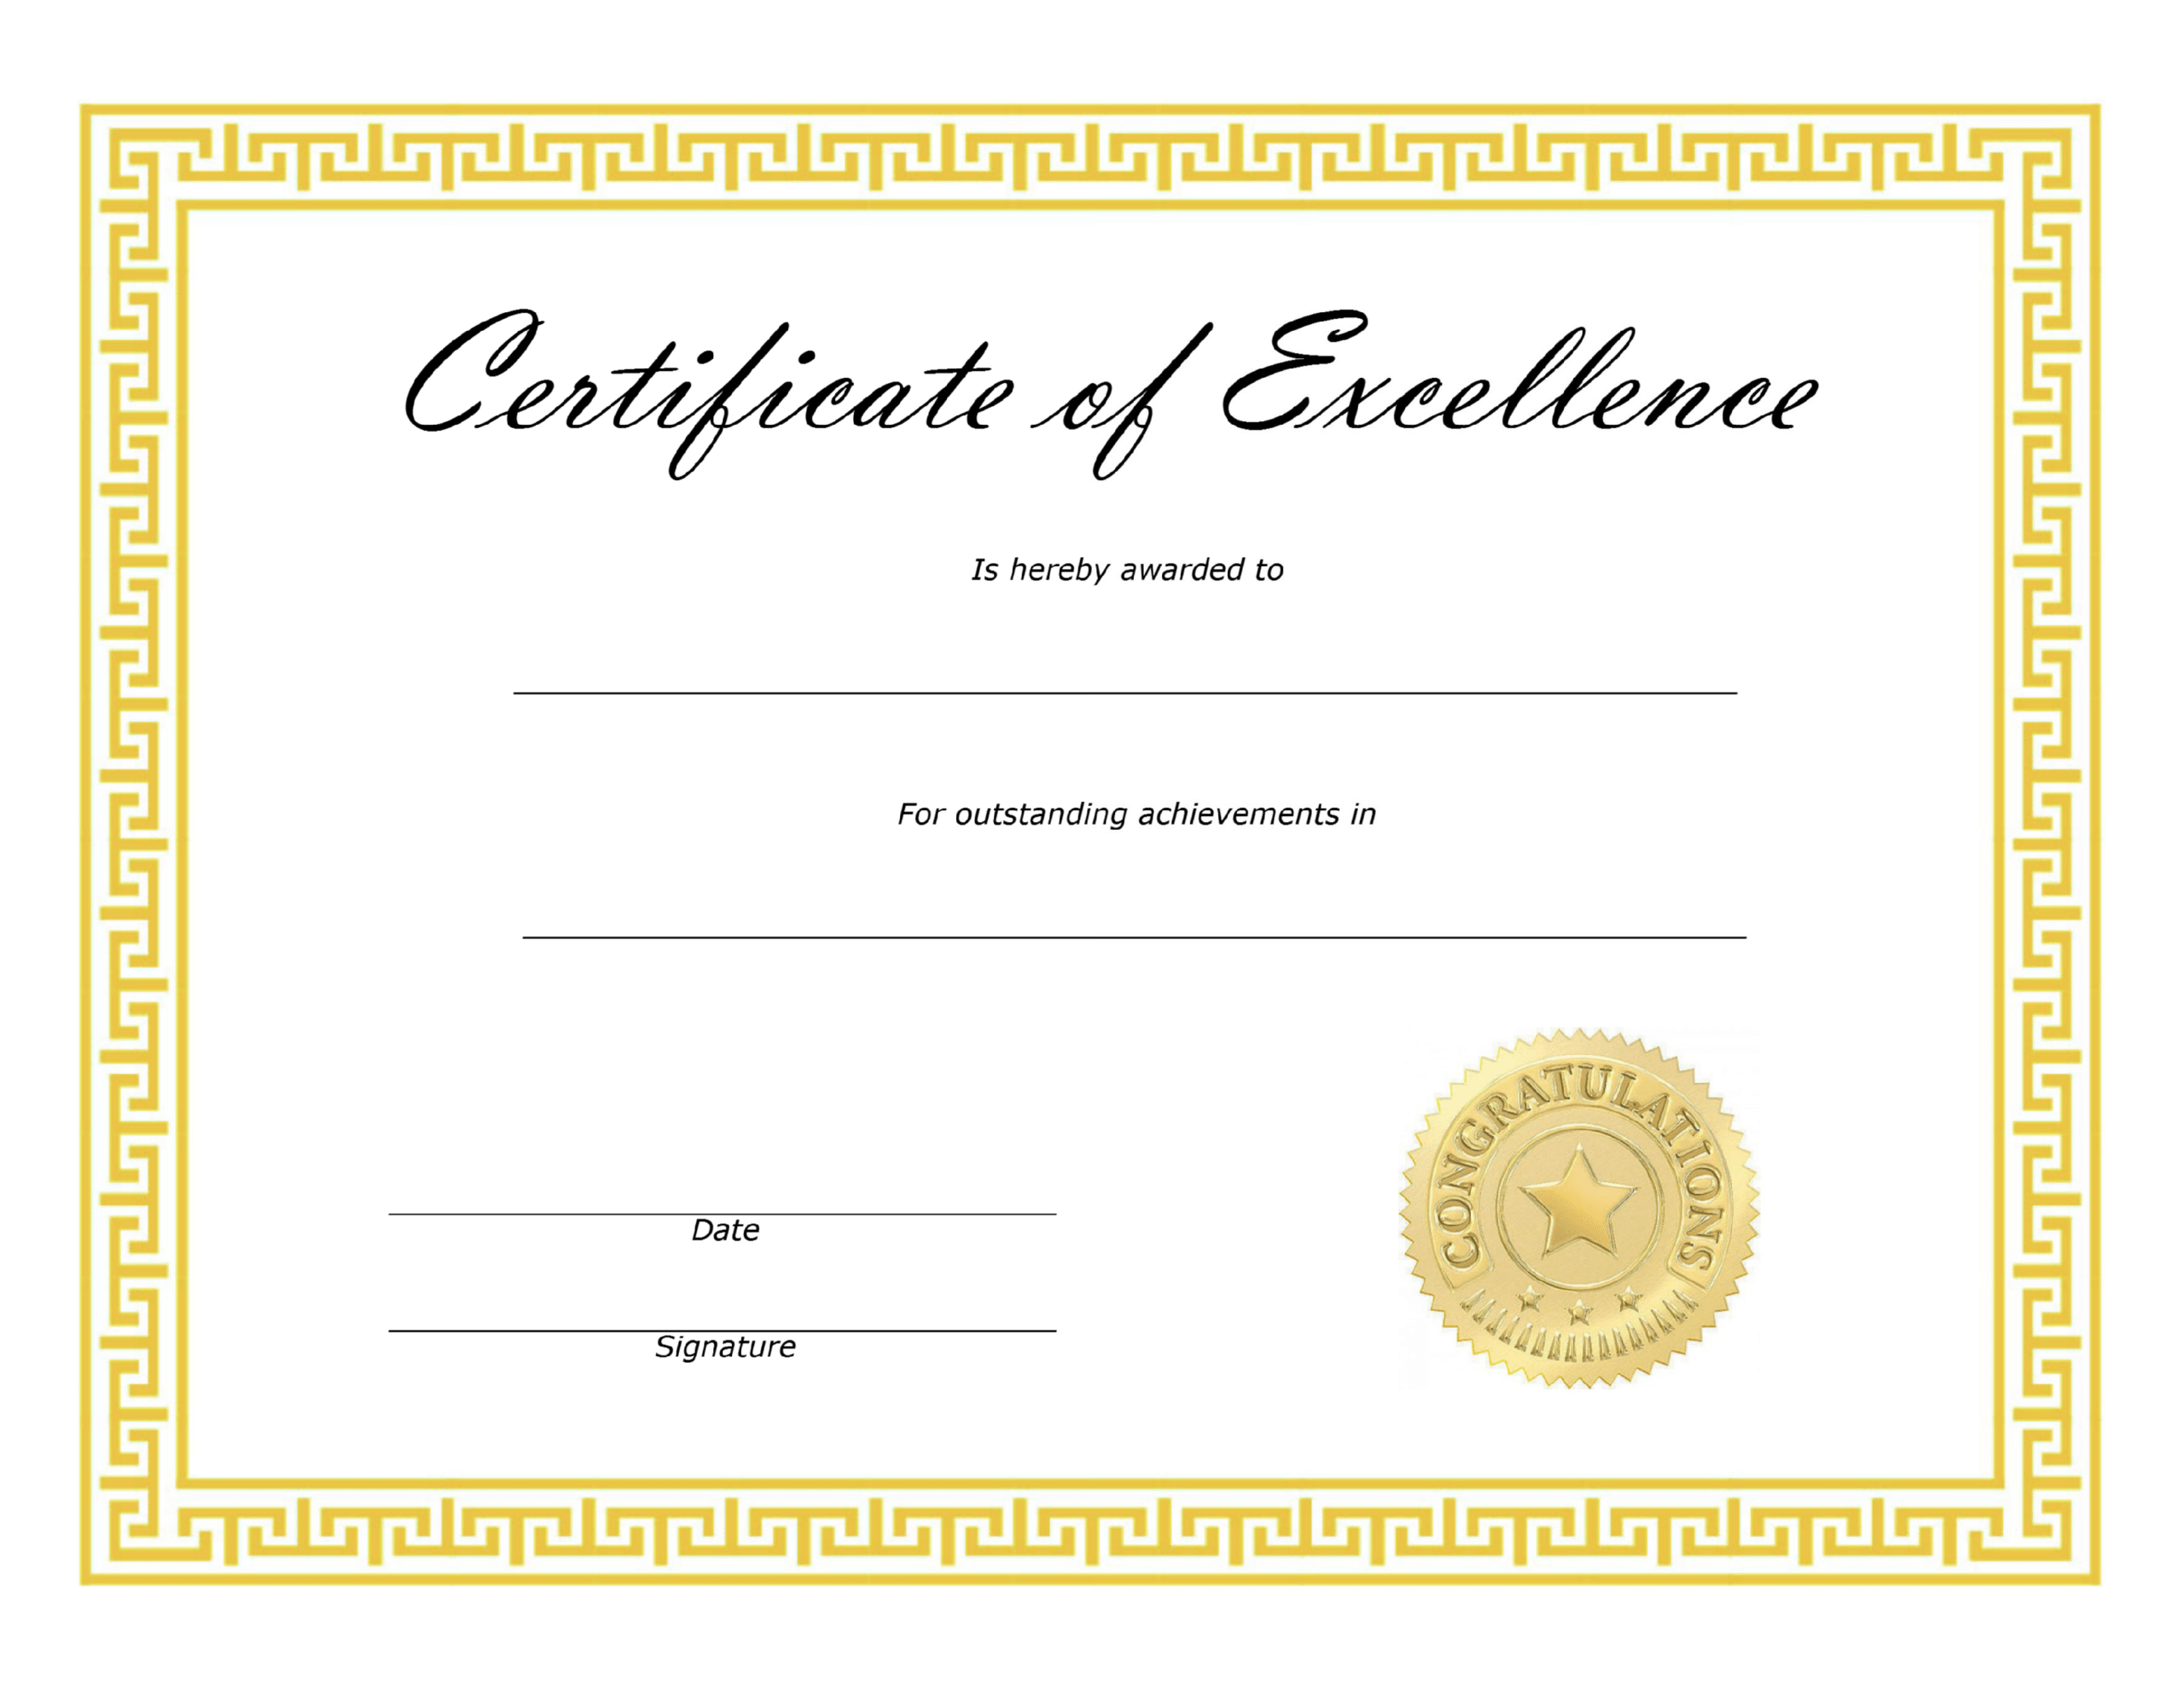 ❤️ Free Sample Certificate Of Excellence Templates❤️ Intended For Award Of Excellence Certificate Template